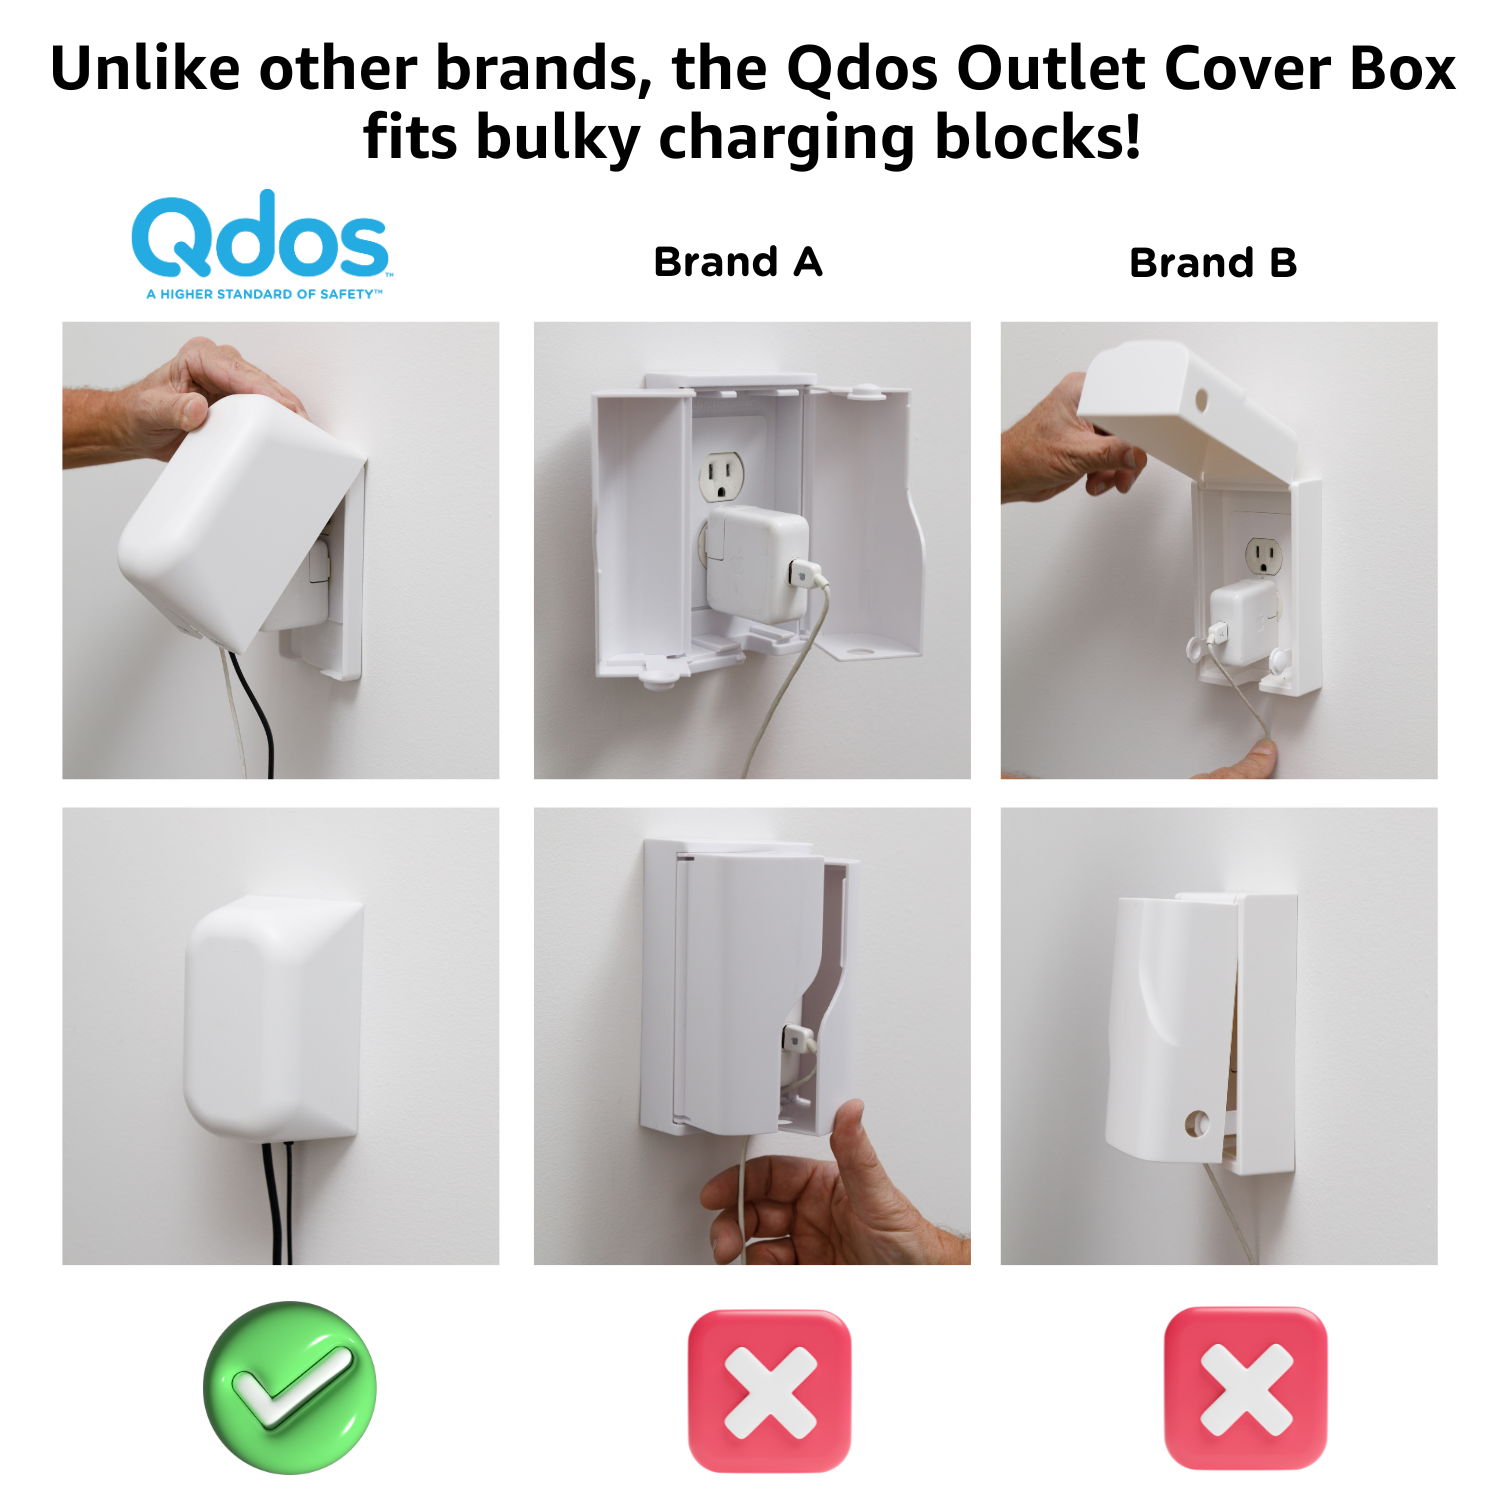 qdos-safety-babyproof-outlet-cover-box-large-2.png